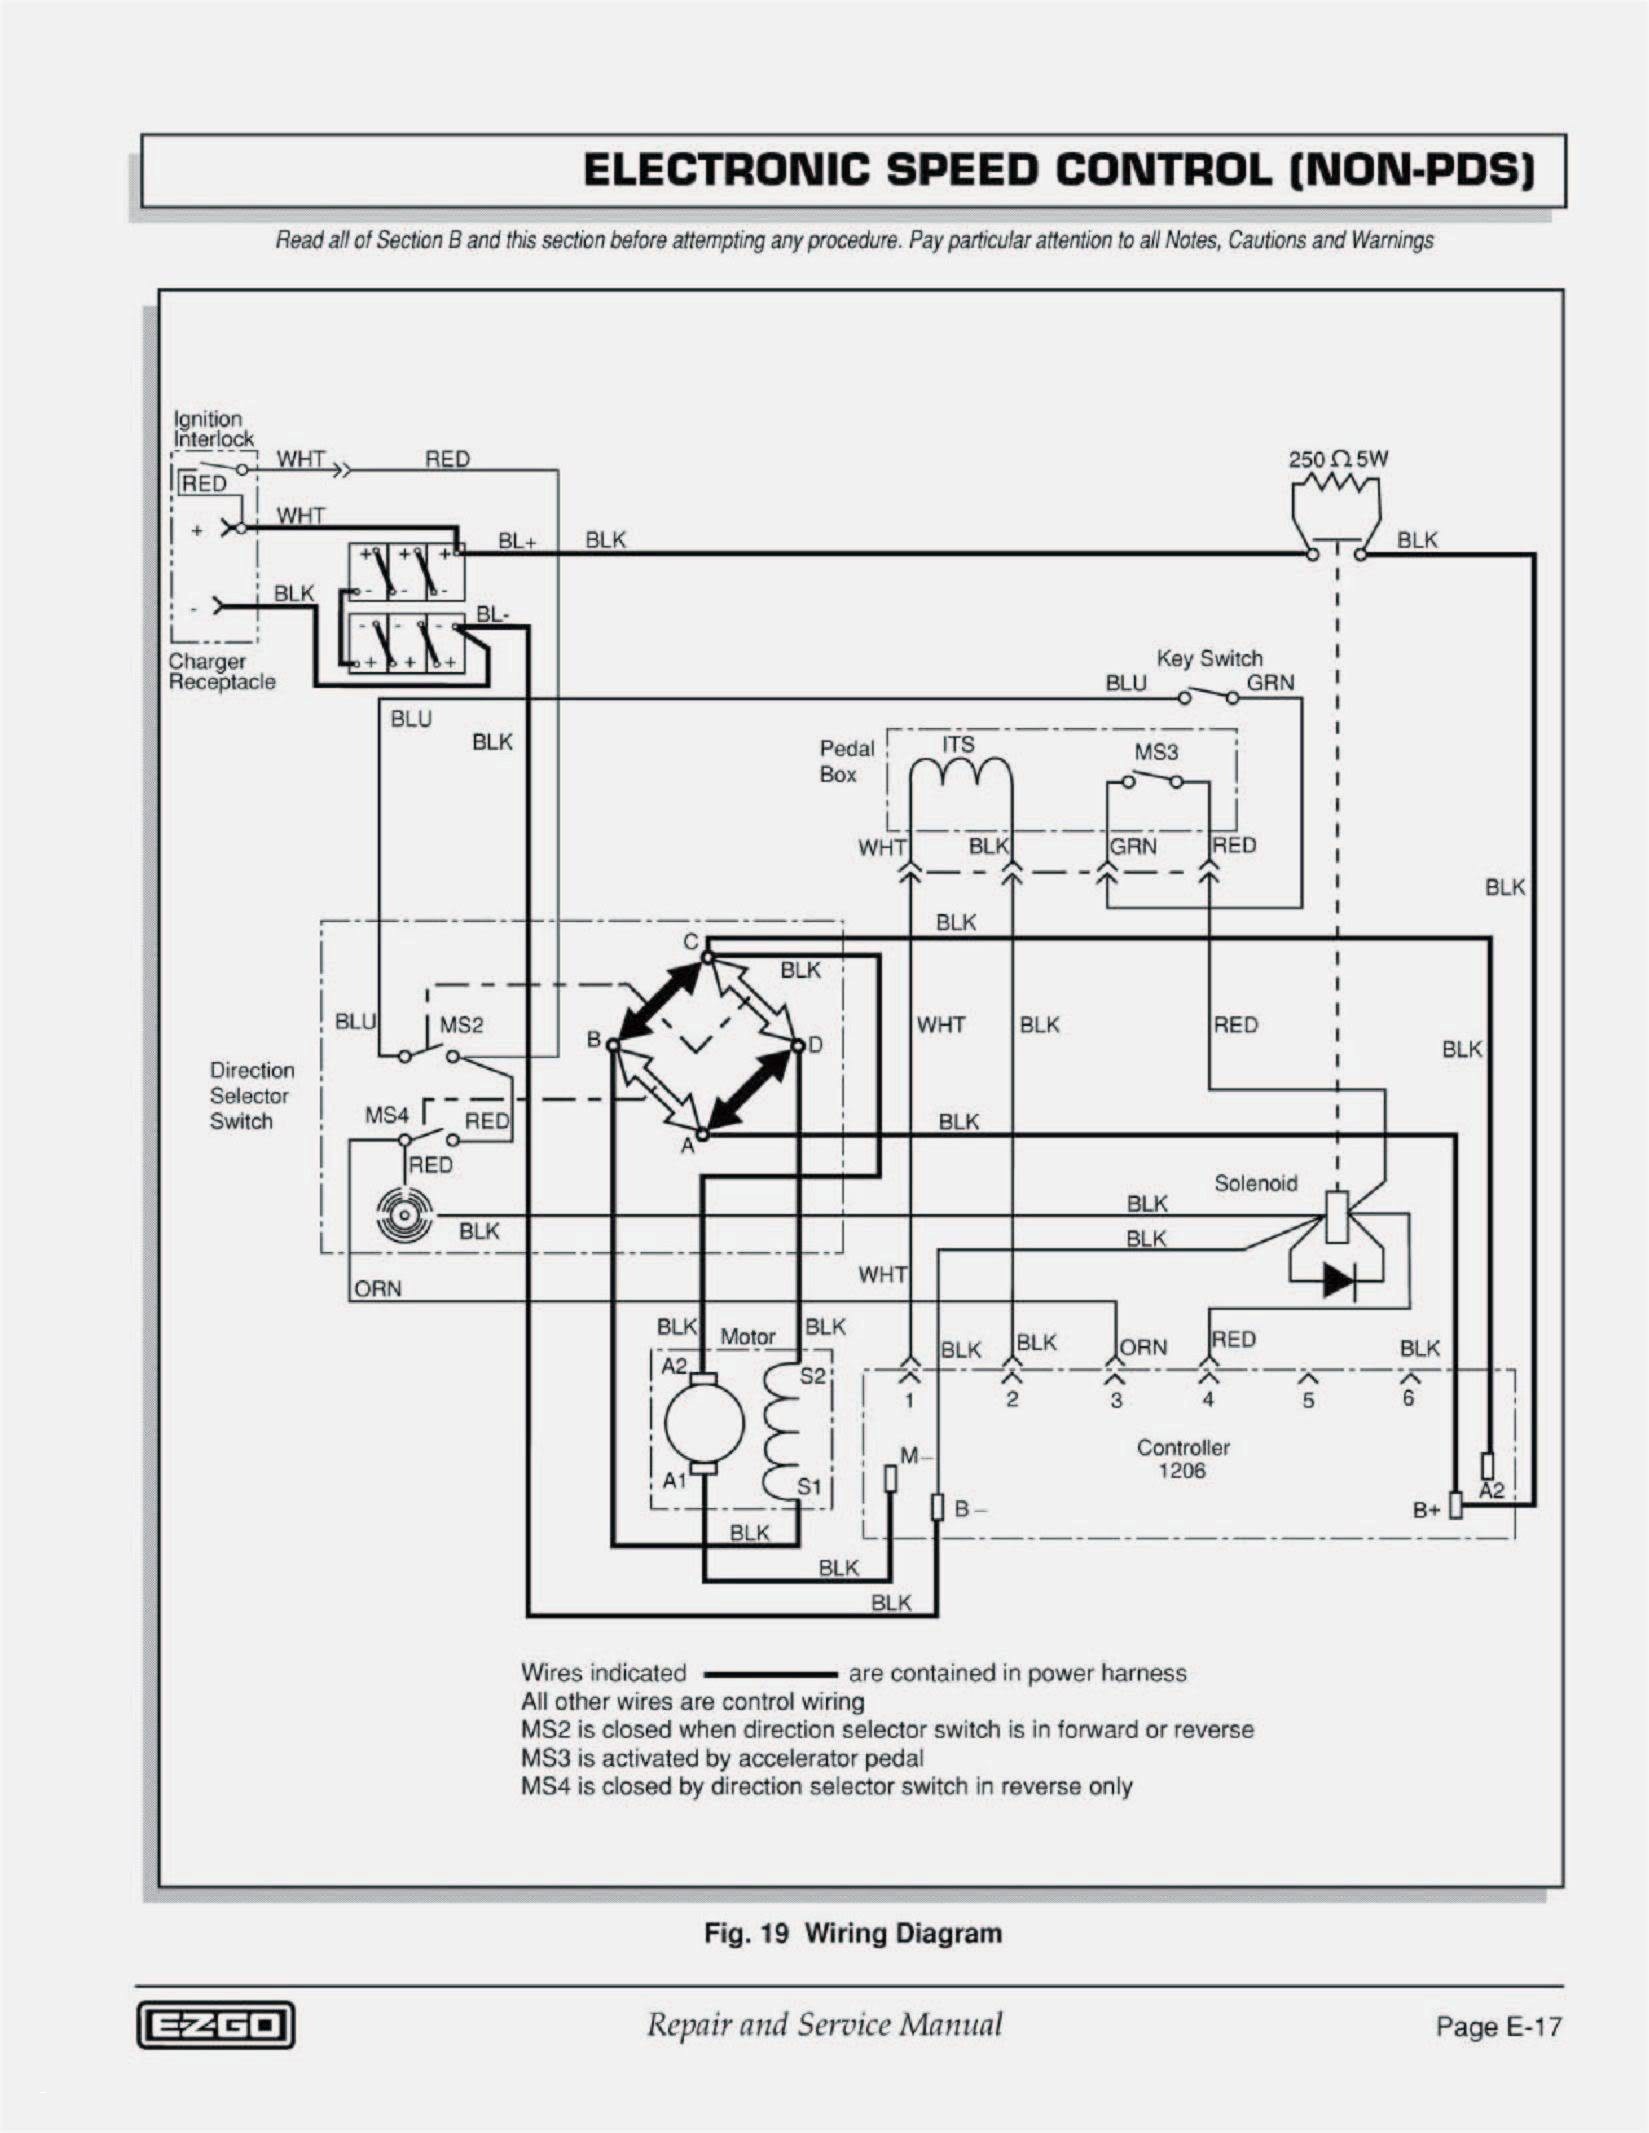 Wiring Diagram for Ezgo Electric Golf Cart Fresh Ez Go Golf Cart Wiring Diagram originalstylophone